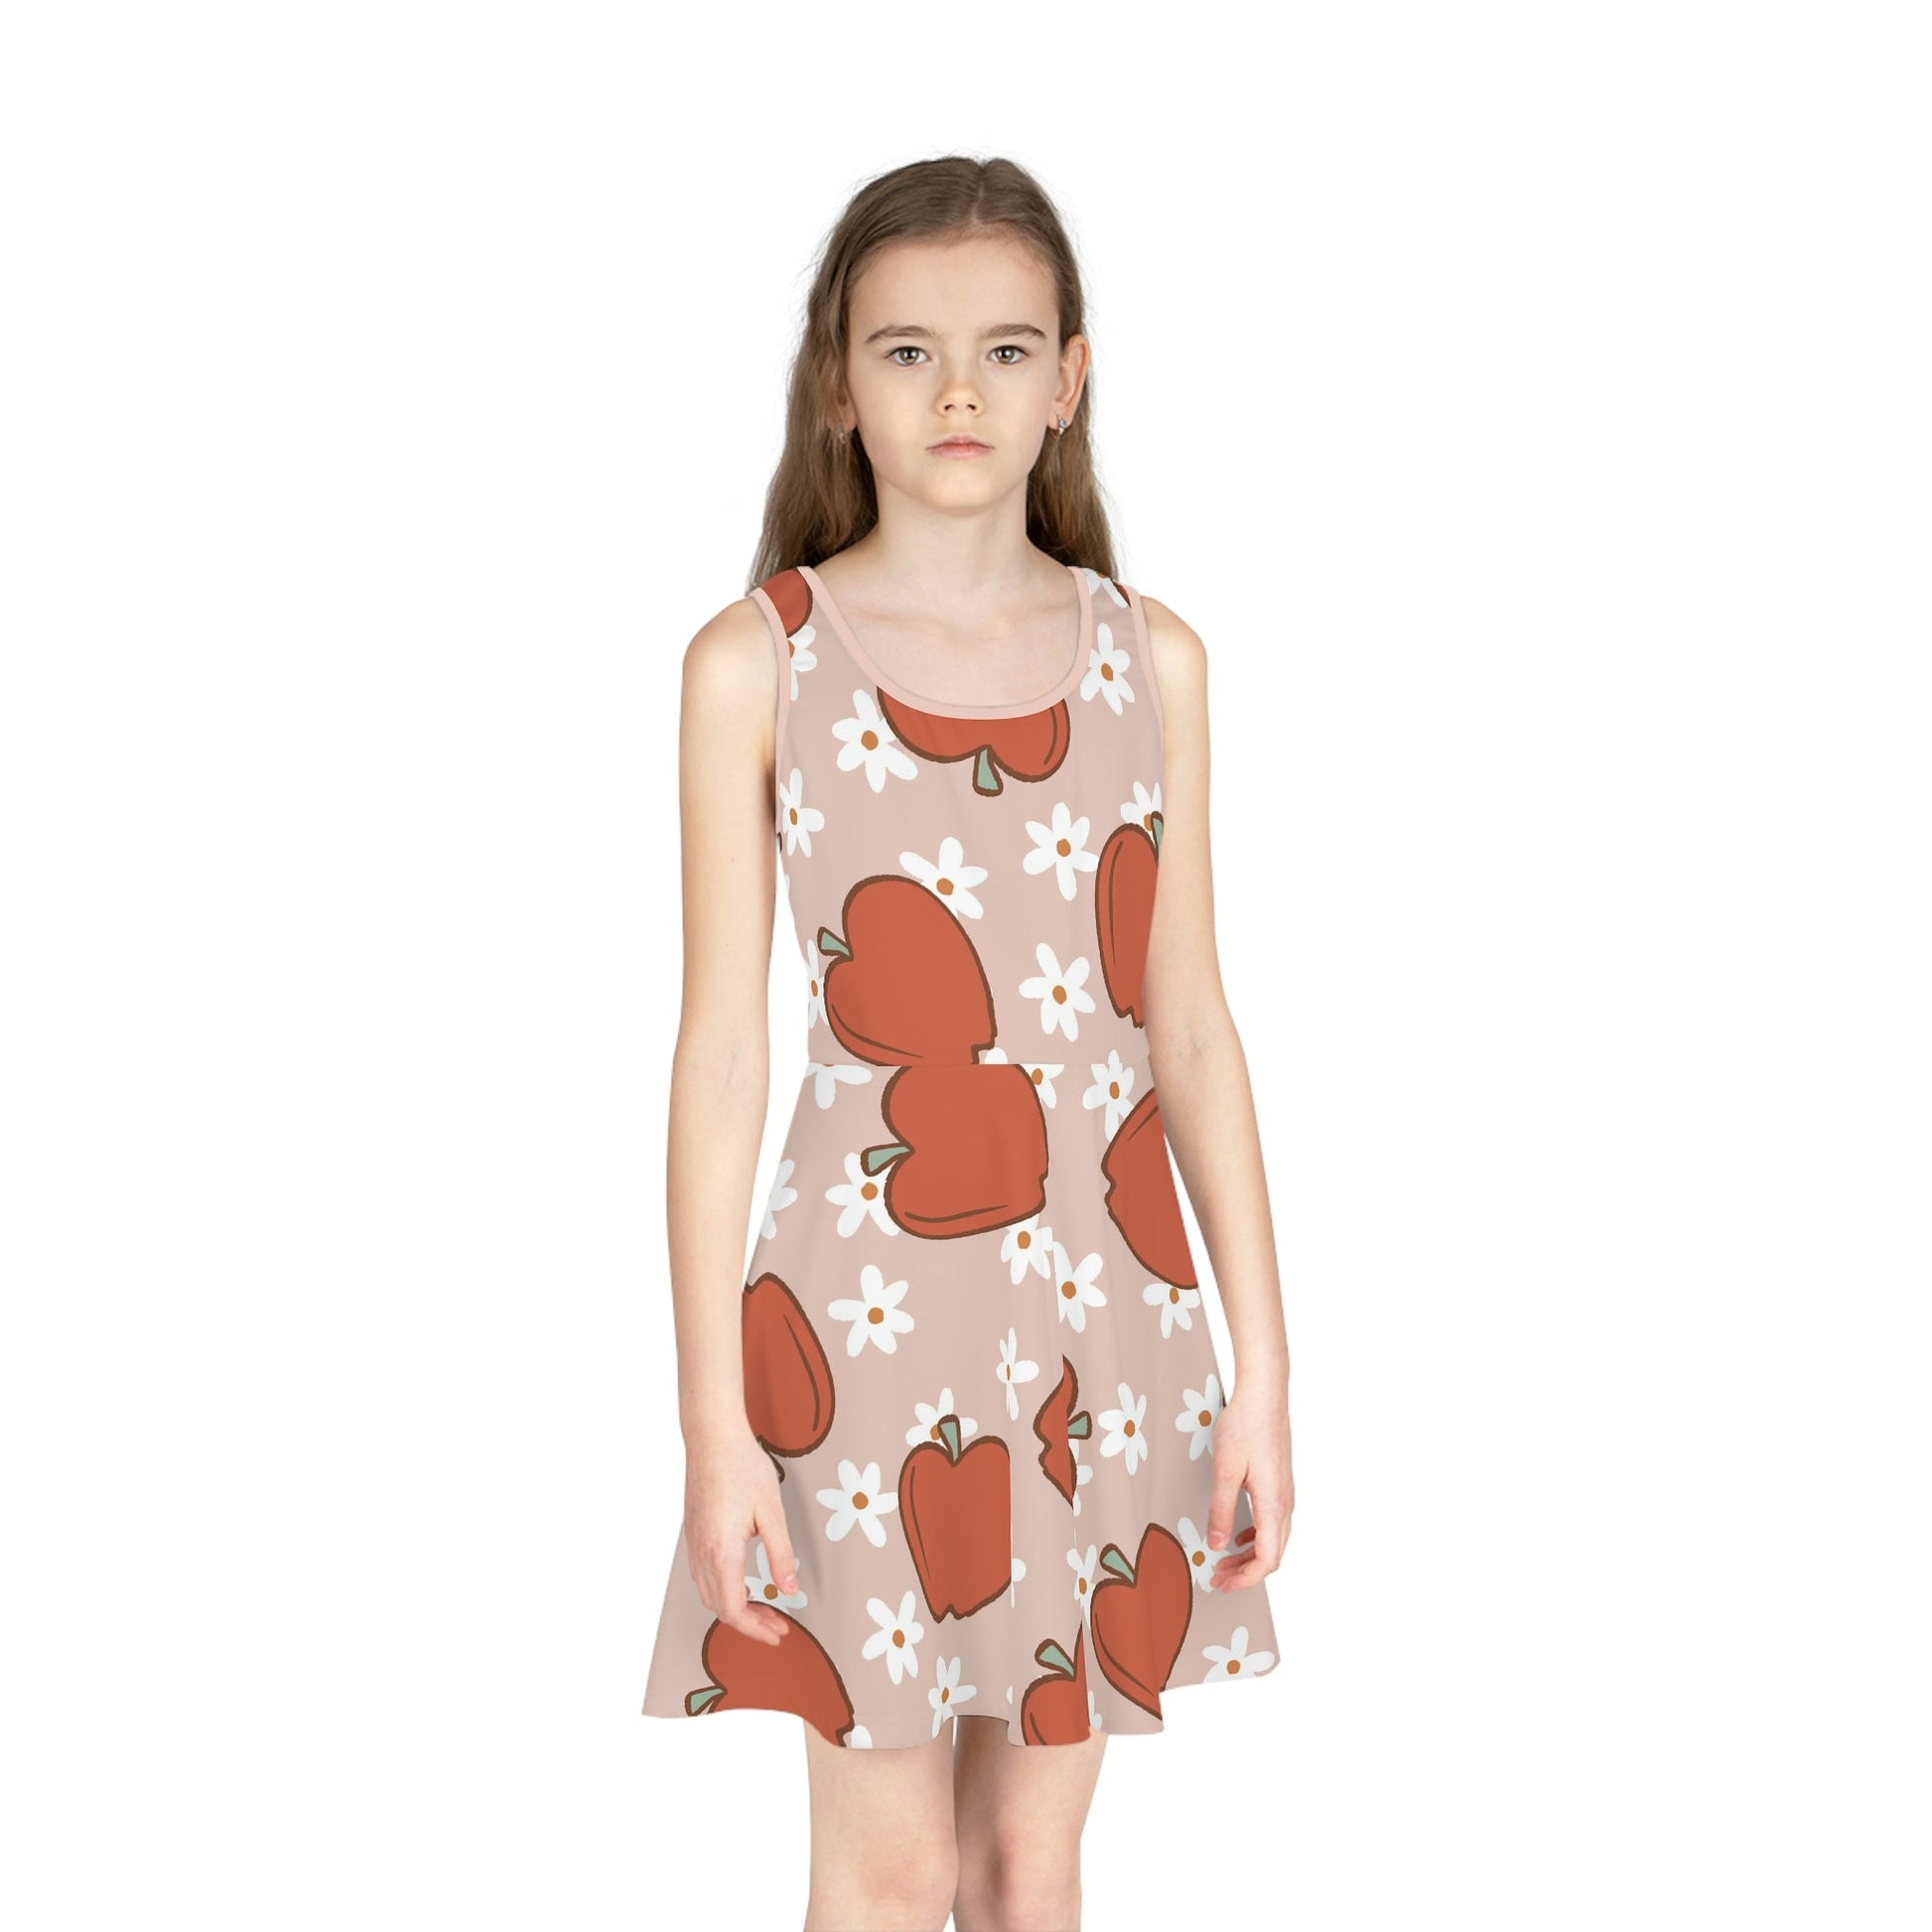 Muted Apples Girls' Sleeveless Sundress All Over PrintAOPAOP Clothing#tag4##tag5##tag6#